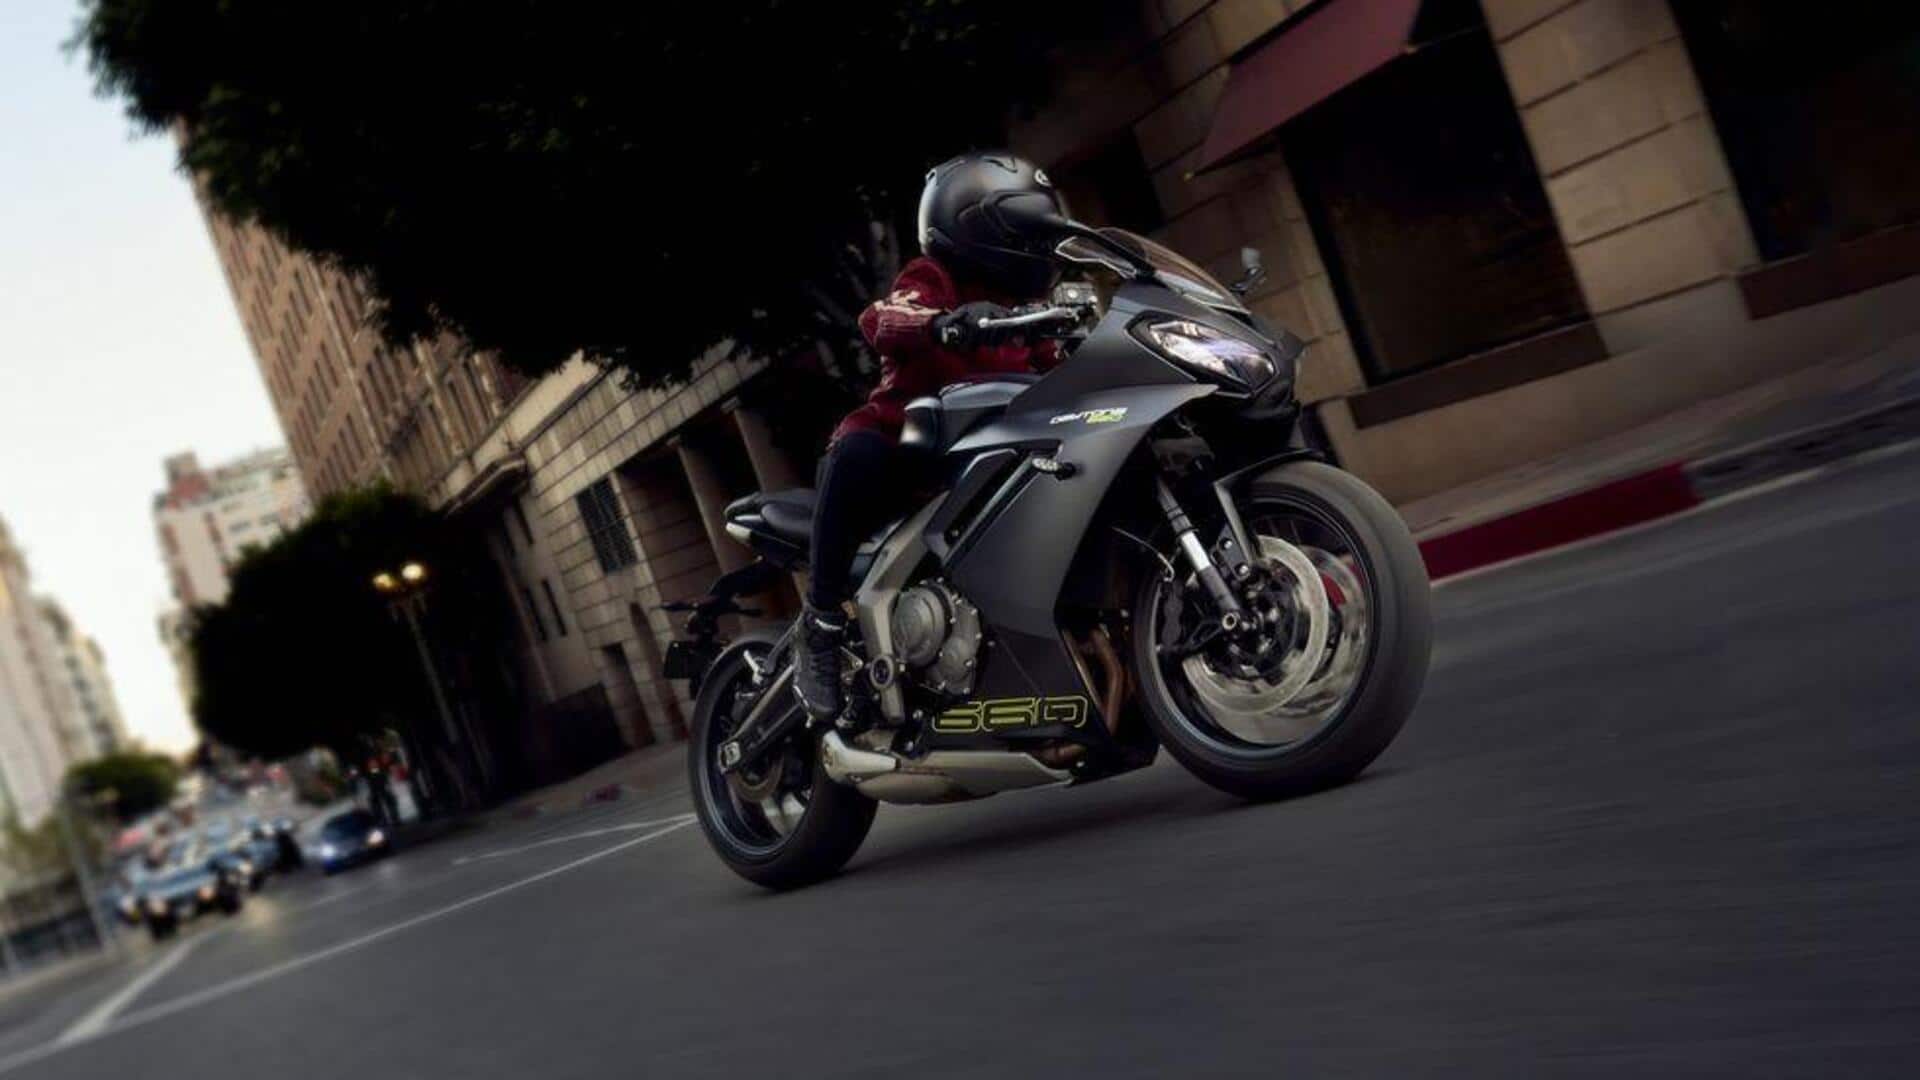 Triumph Daytona 660 launched in Europe; India debut likely soon